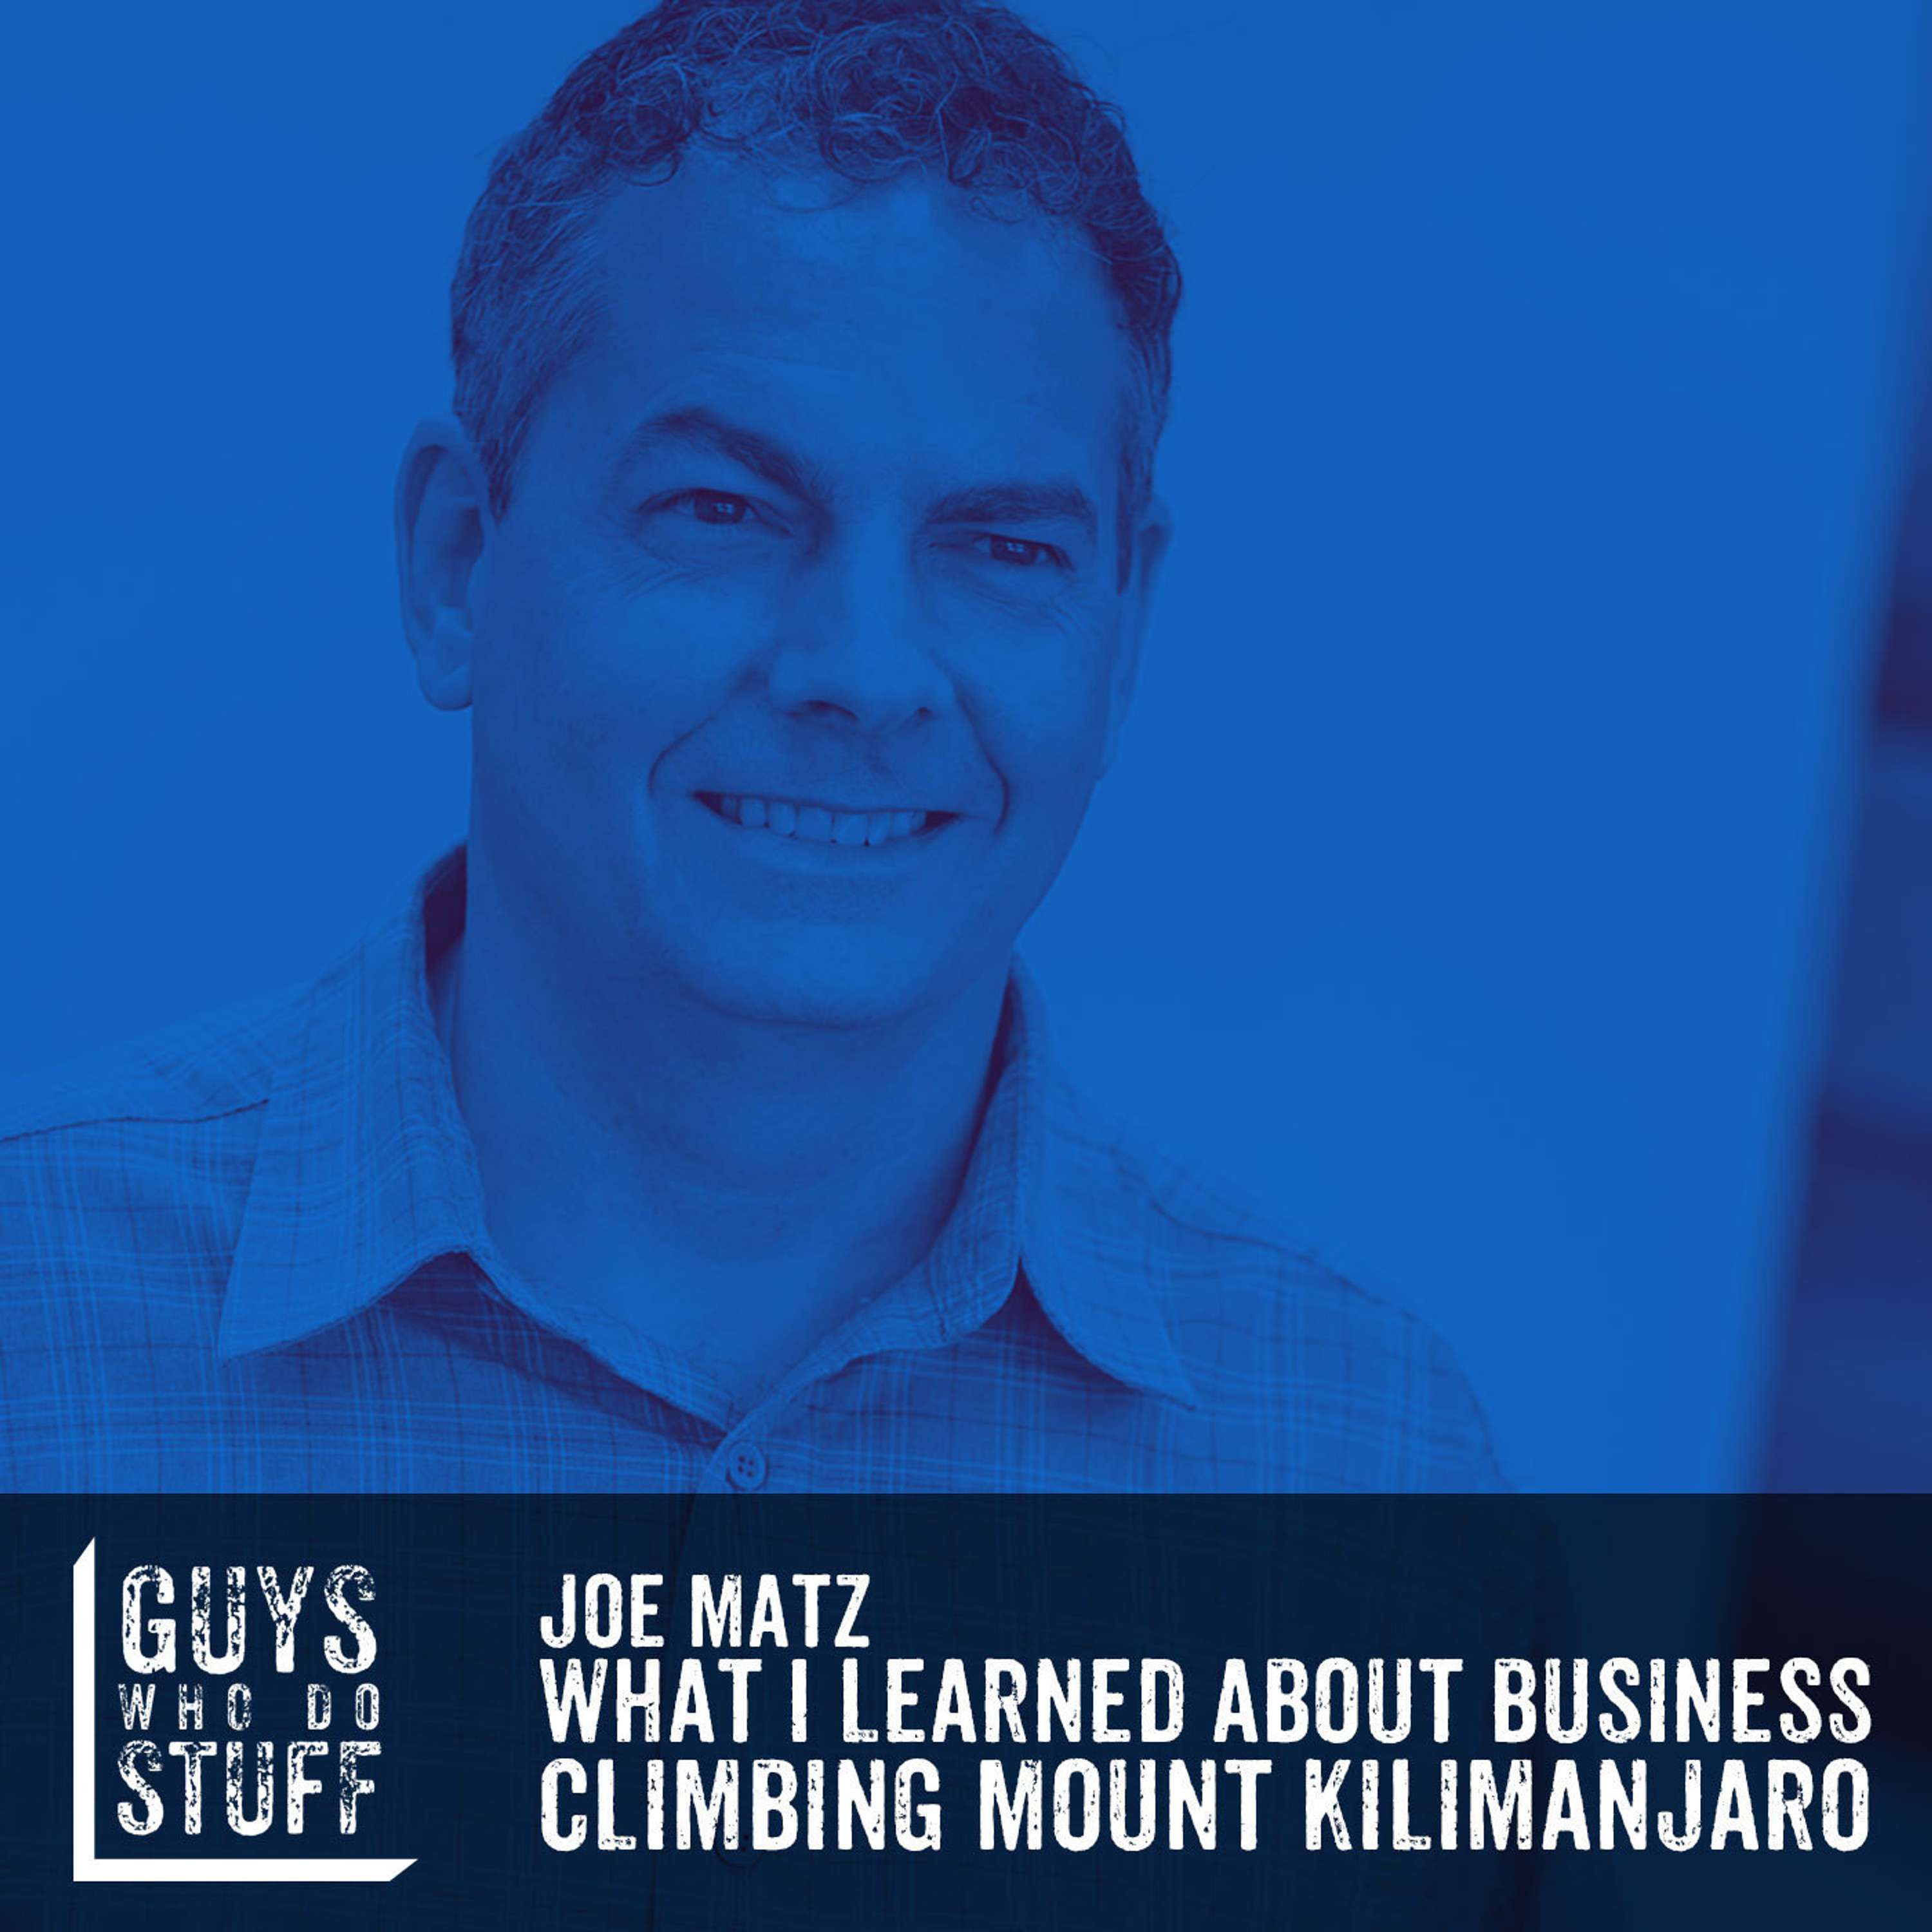 Joe Matz – What I learned about business by climbing Mount Kilimanjaro